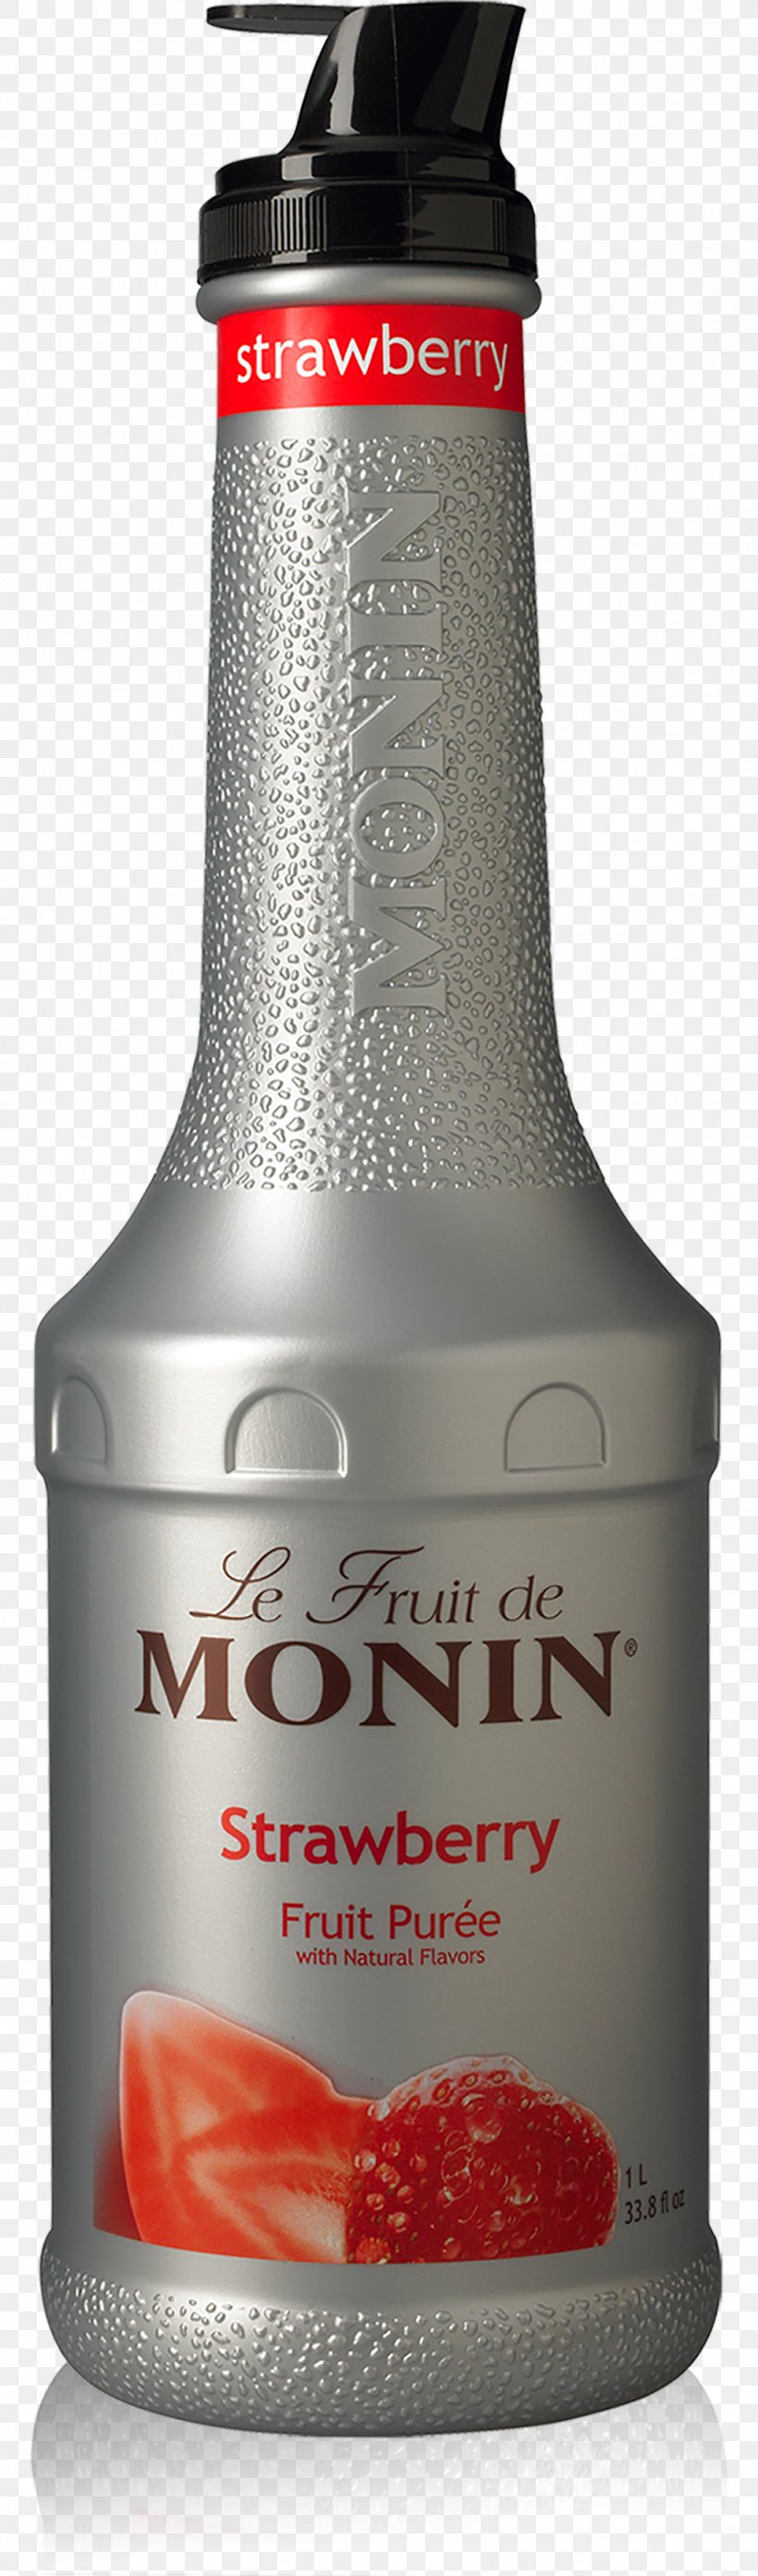 Iced Tea Cocktail Purée Strawberry GEORGES MONIN SAS, PNG, 1024x3480px, Iced Tea, Bottle, Cocktail, Coffee, Dairy Products Download Free